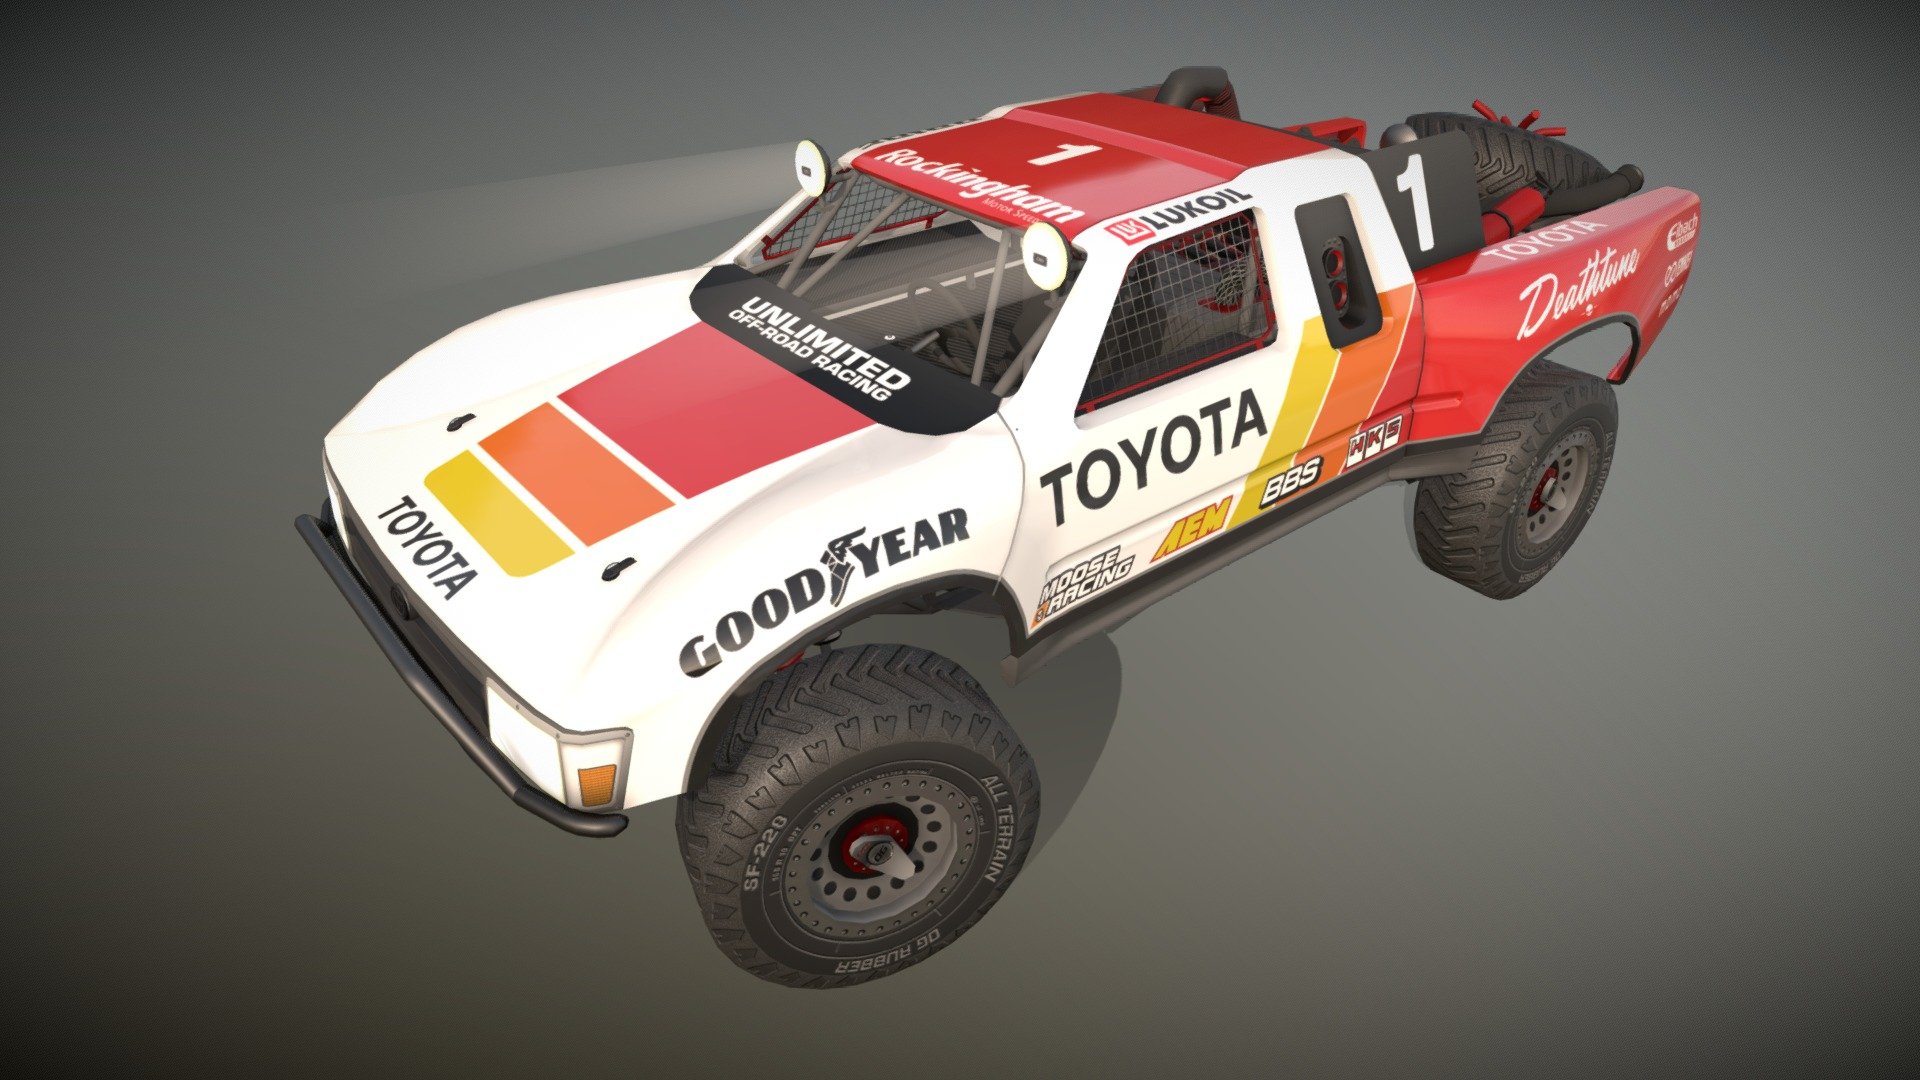 Low poly model. HQ interior. Optimized textures. Baked AO. Body - 1mat. 2048 texture. Wheels - 1mat. 512 texture - Toyota Baja Trophy Truck - 3D model by Главмеш (@glavmesh) 3d model